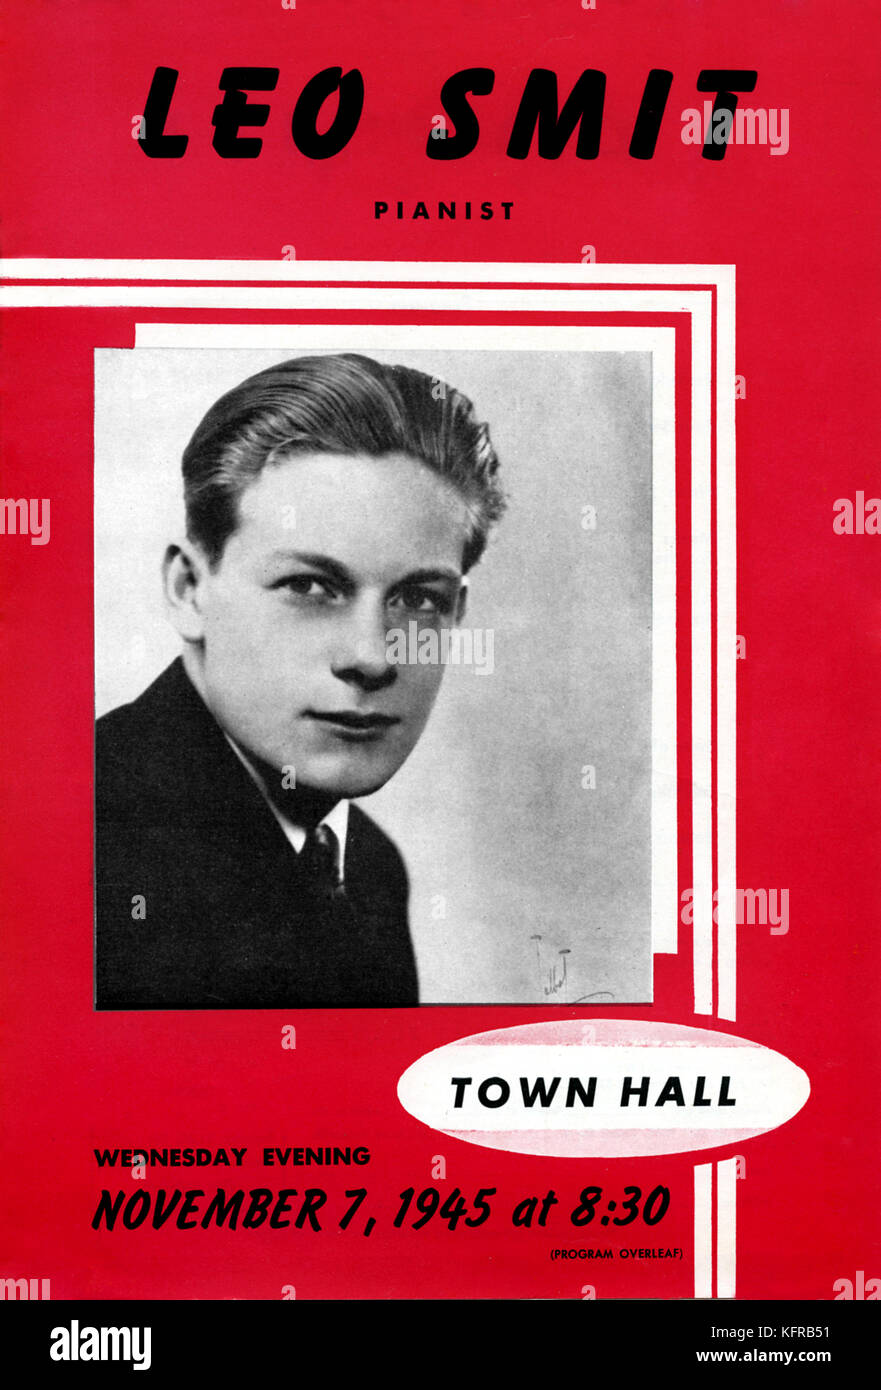 Leo Smit - concert poster portrait. Concert held at Town Hall, New York City, US, on 7 November 1945. LS: American pianist and composer of contemporary classical music, 12 January  1921 – 12 December 1999. Stock Photo